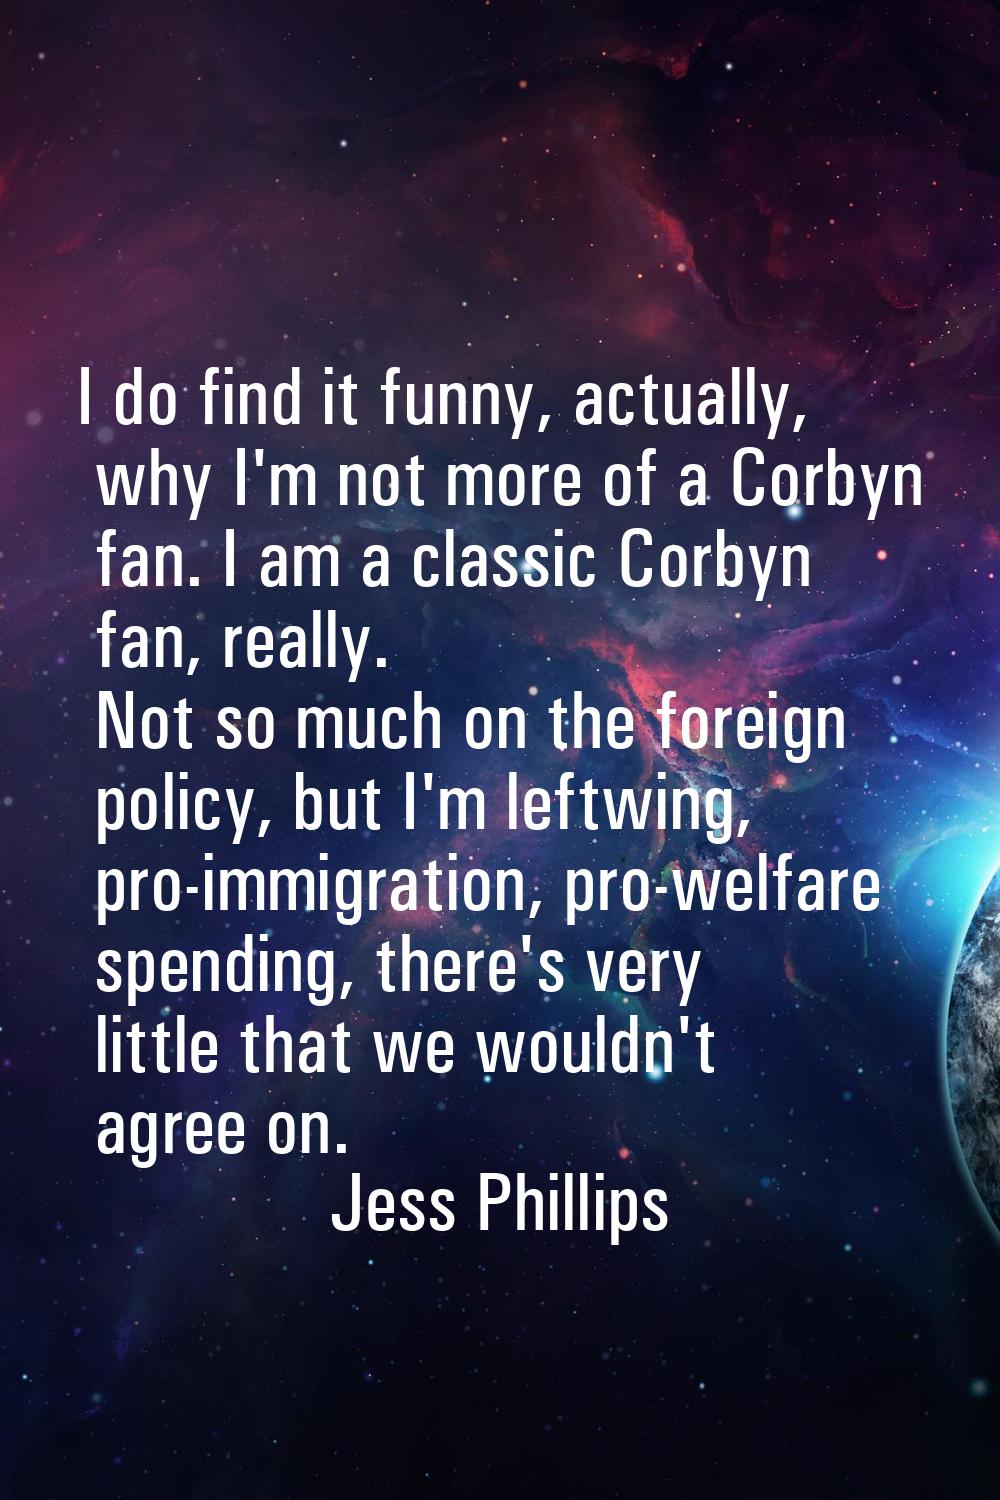 I do find it funny, actually, why I'm not more of a Corbyn fan. I am a classic Corbyn fan, really. 